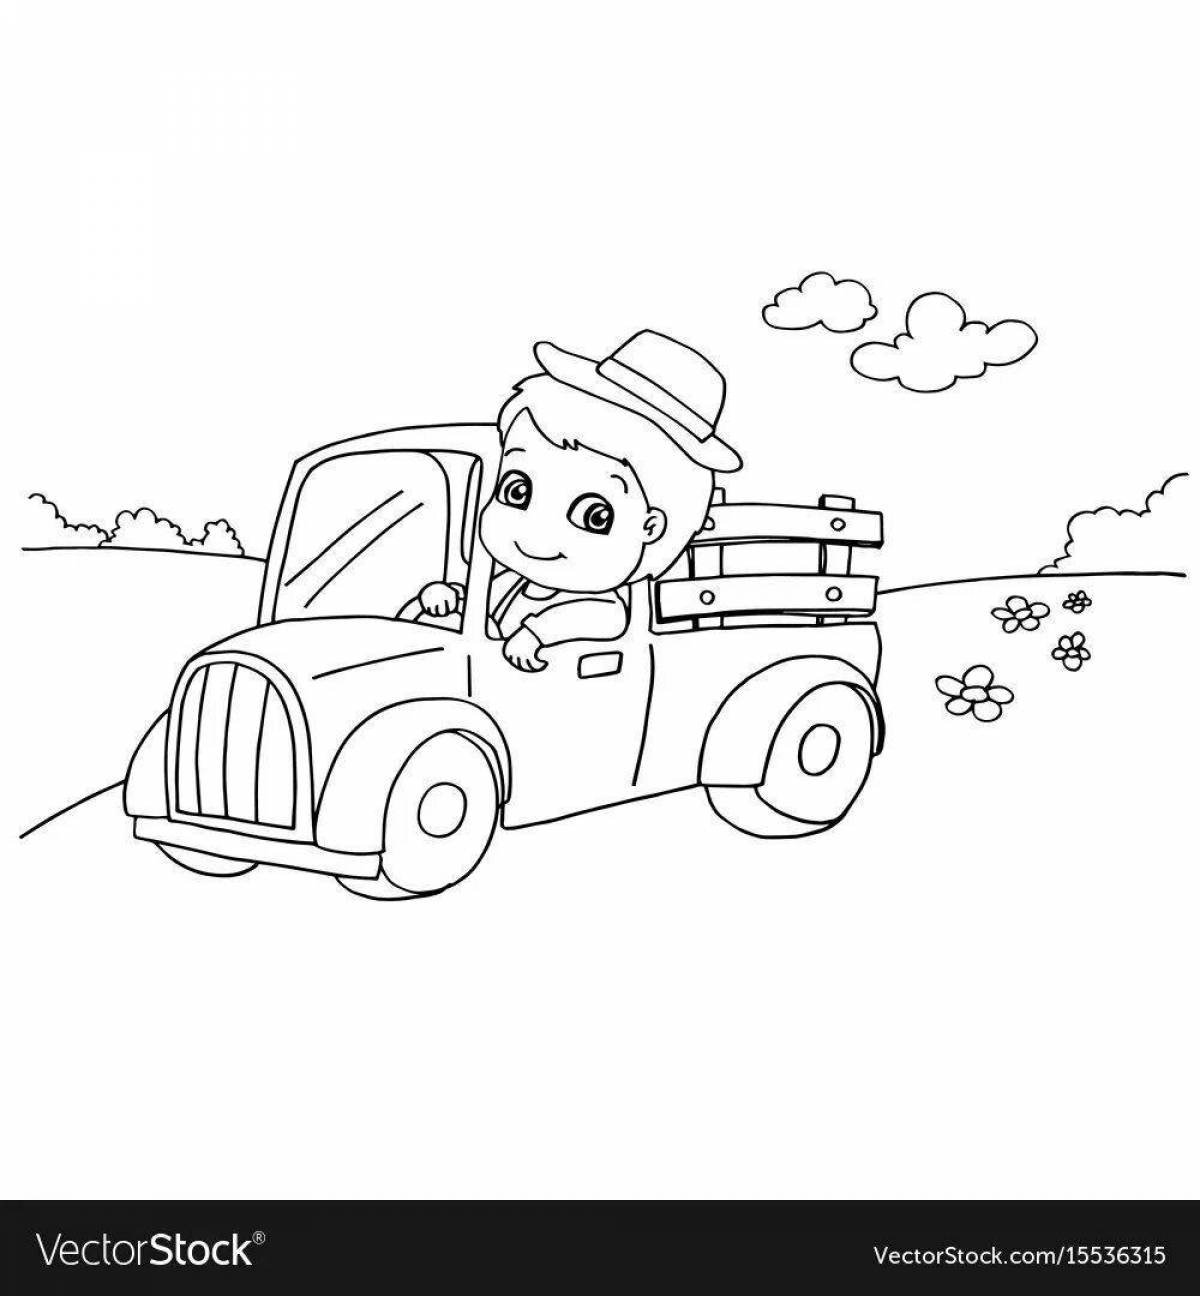 Coloring page calm driver